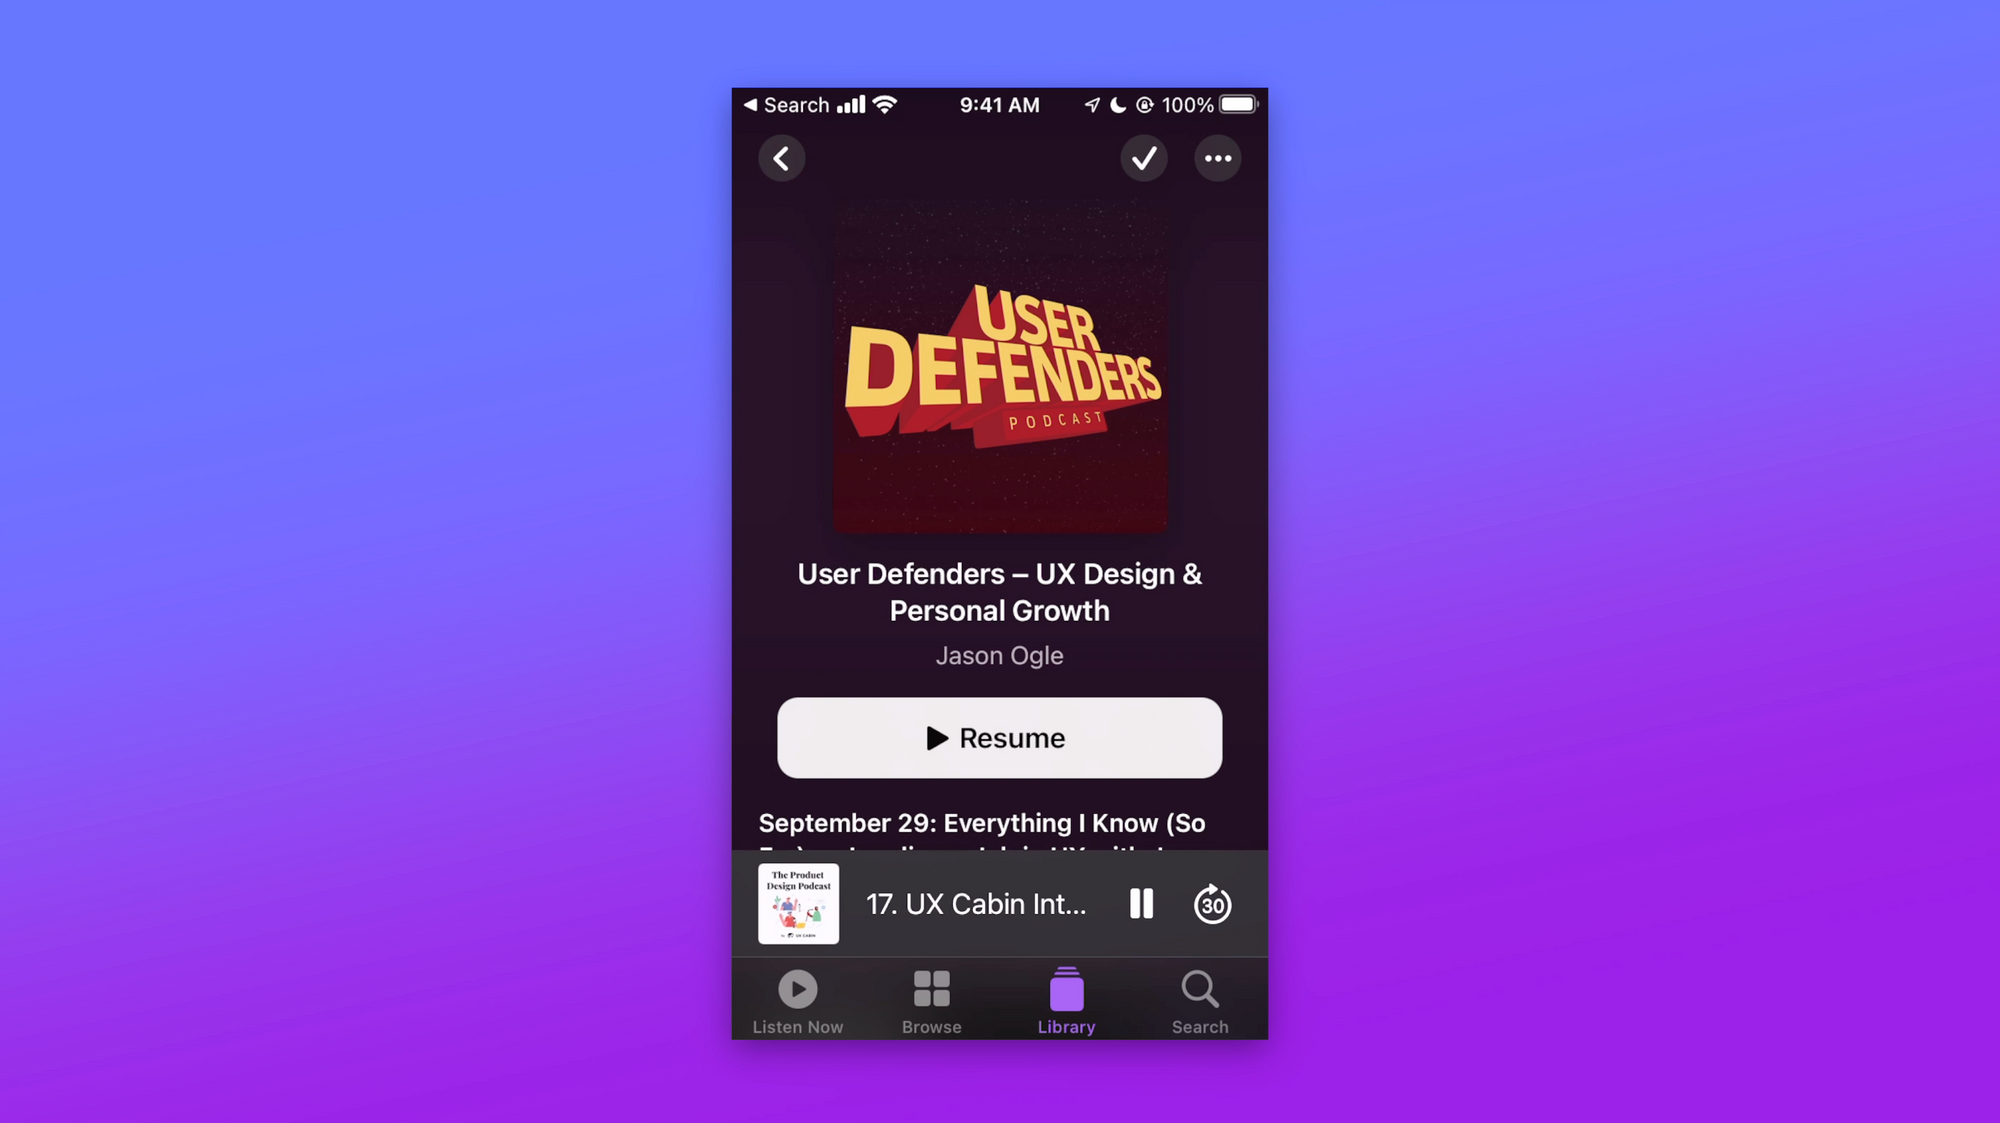 User Defenders Podcast black, yellow and red graphic cover